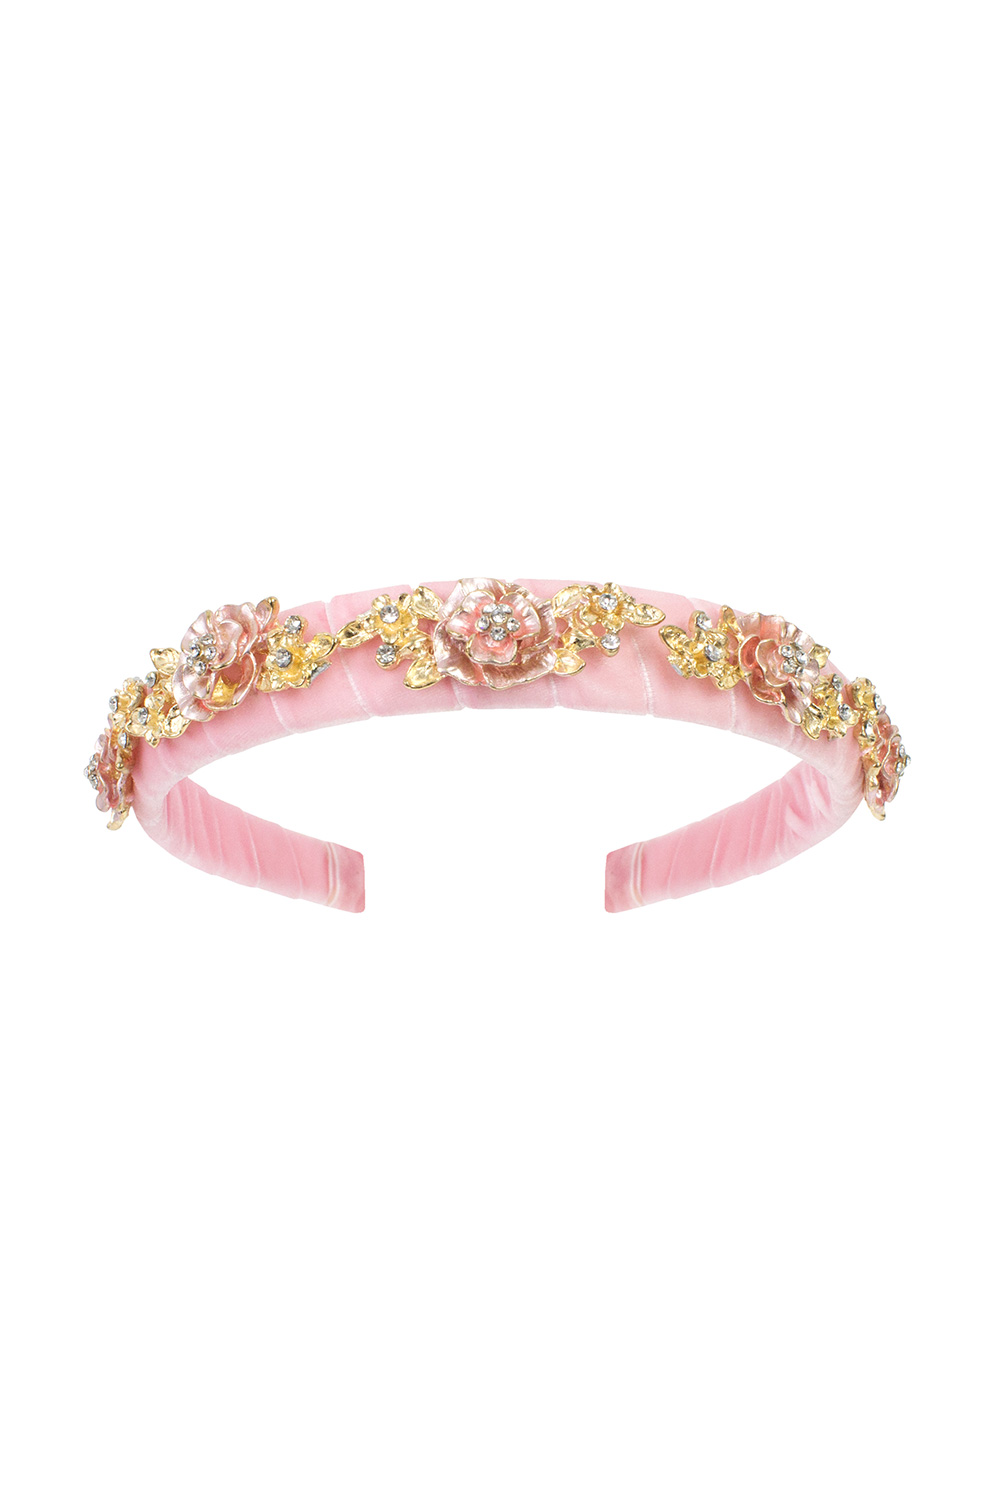 pink and gold floral hair band